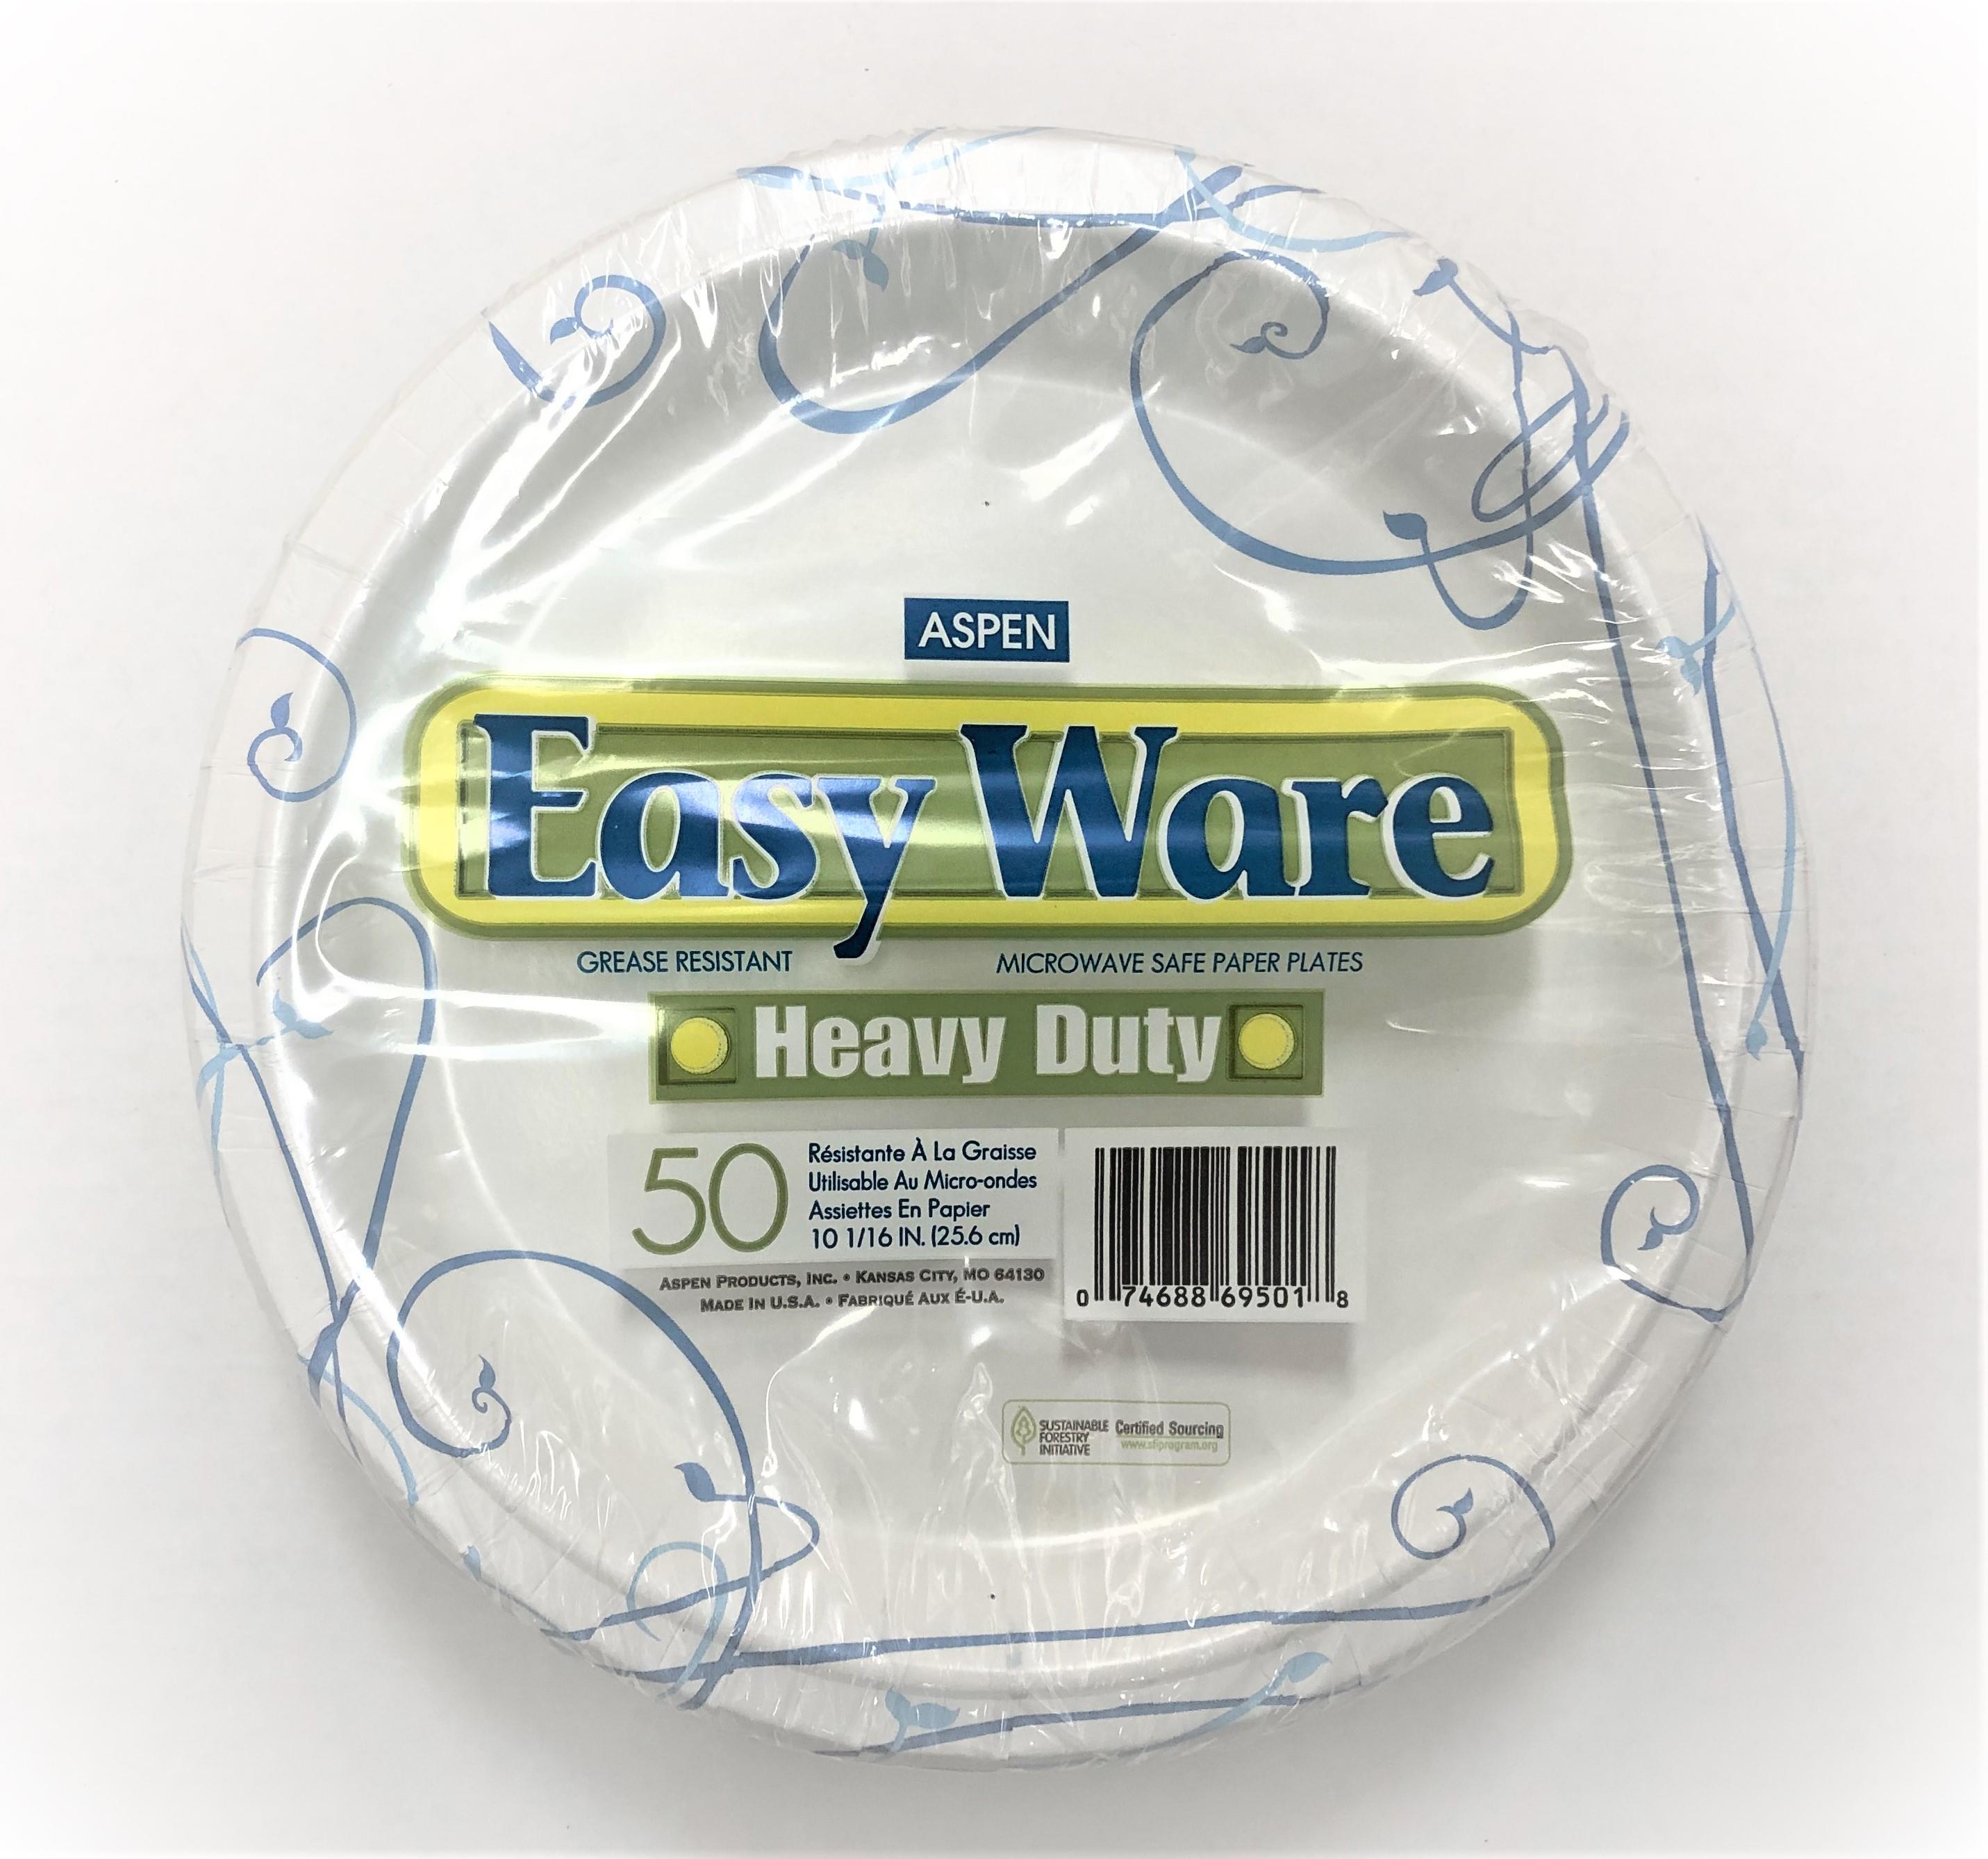 Easy Ware 10 Heavy Duty Coated Paper Plates, 50/Pack